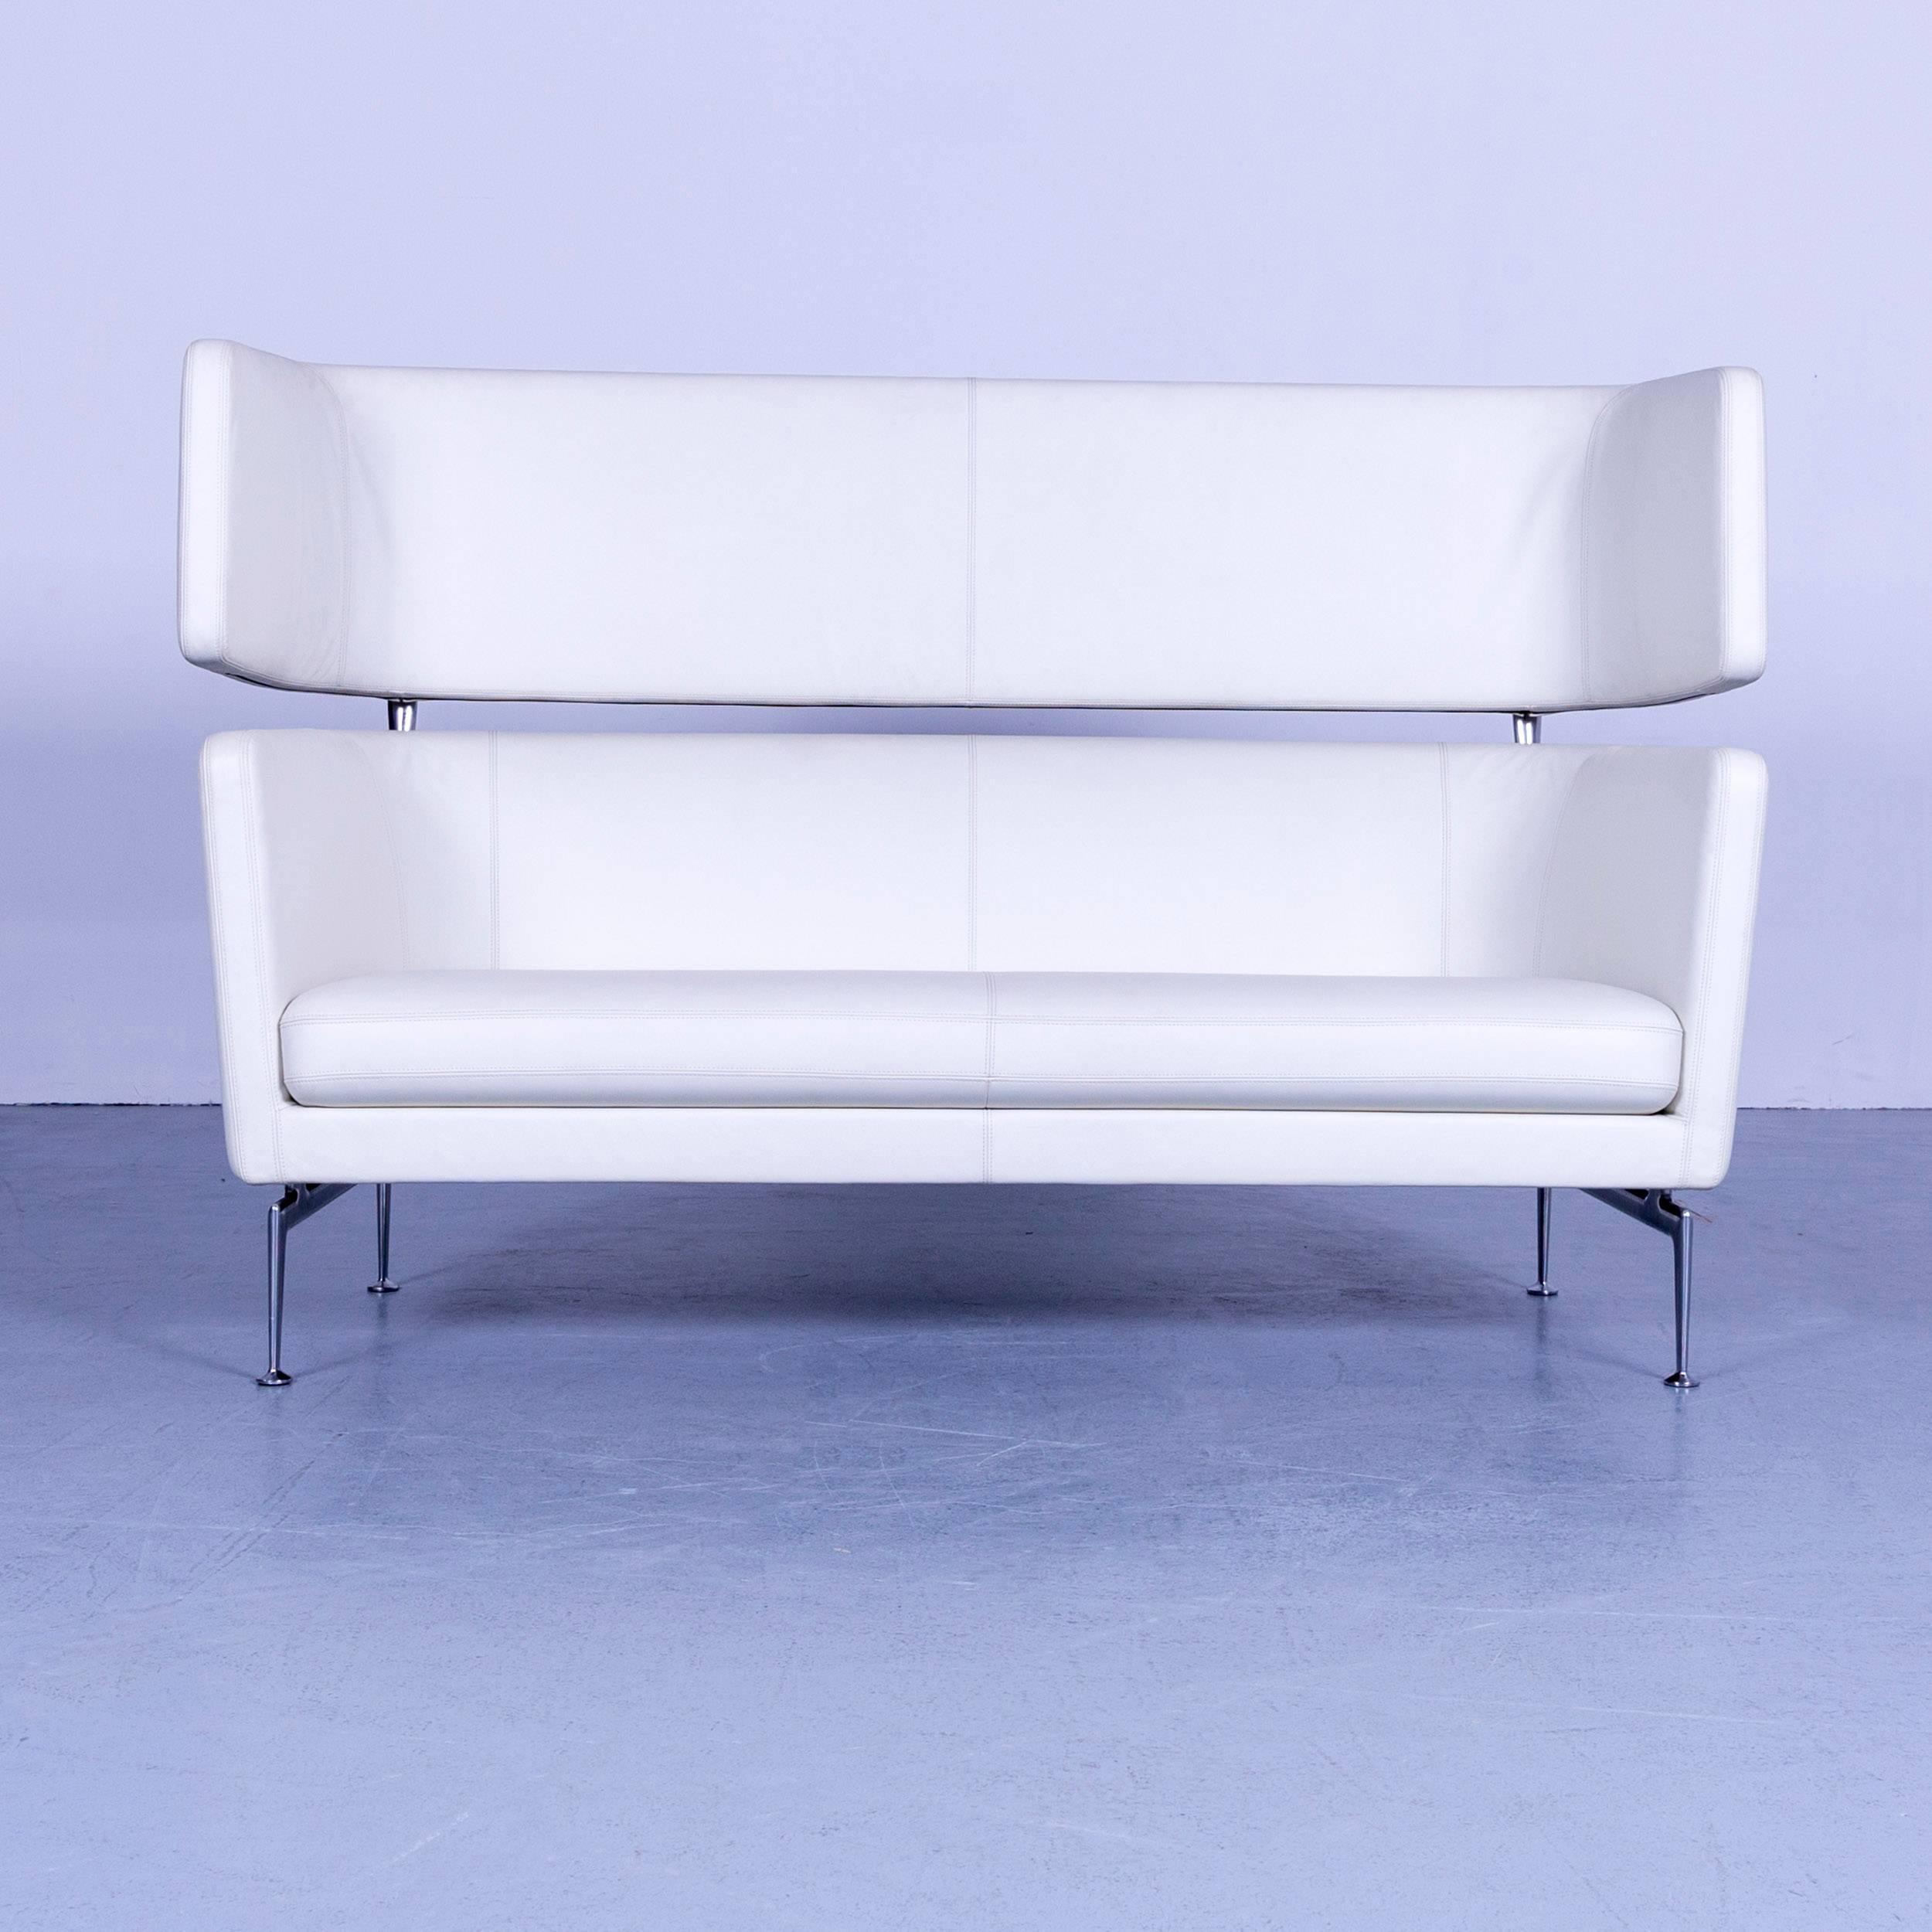 We offer delivery options to most destinations on earth. Find our shipping quotes at the bottom of this page in the shipping section.

We bring to you an Vitra Suita Leather sofa set white two-seat and armchair.

Shipping:

An on point shipping